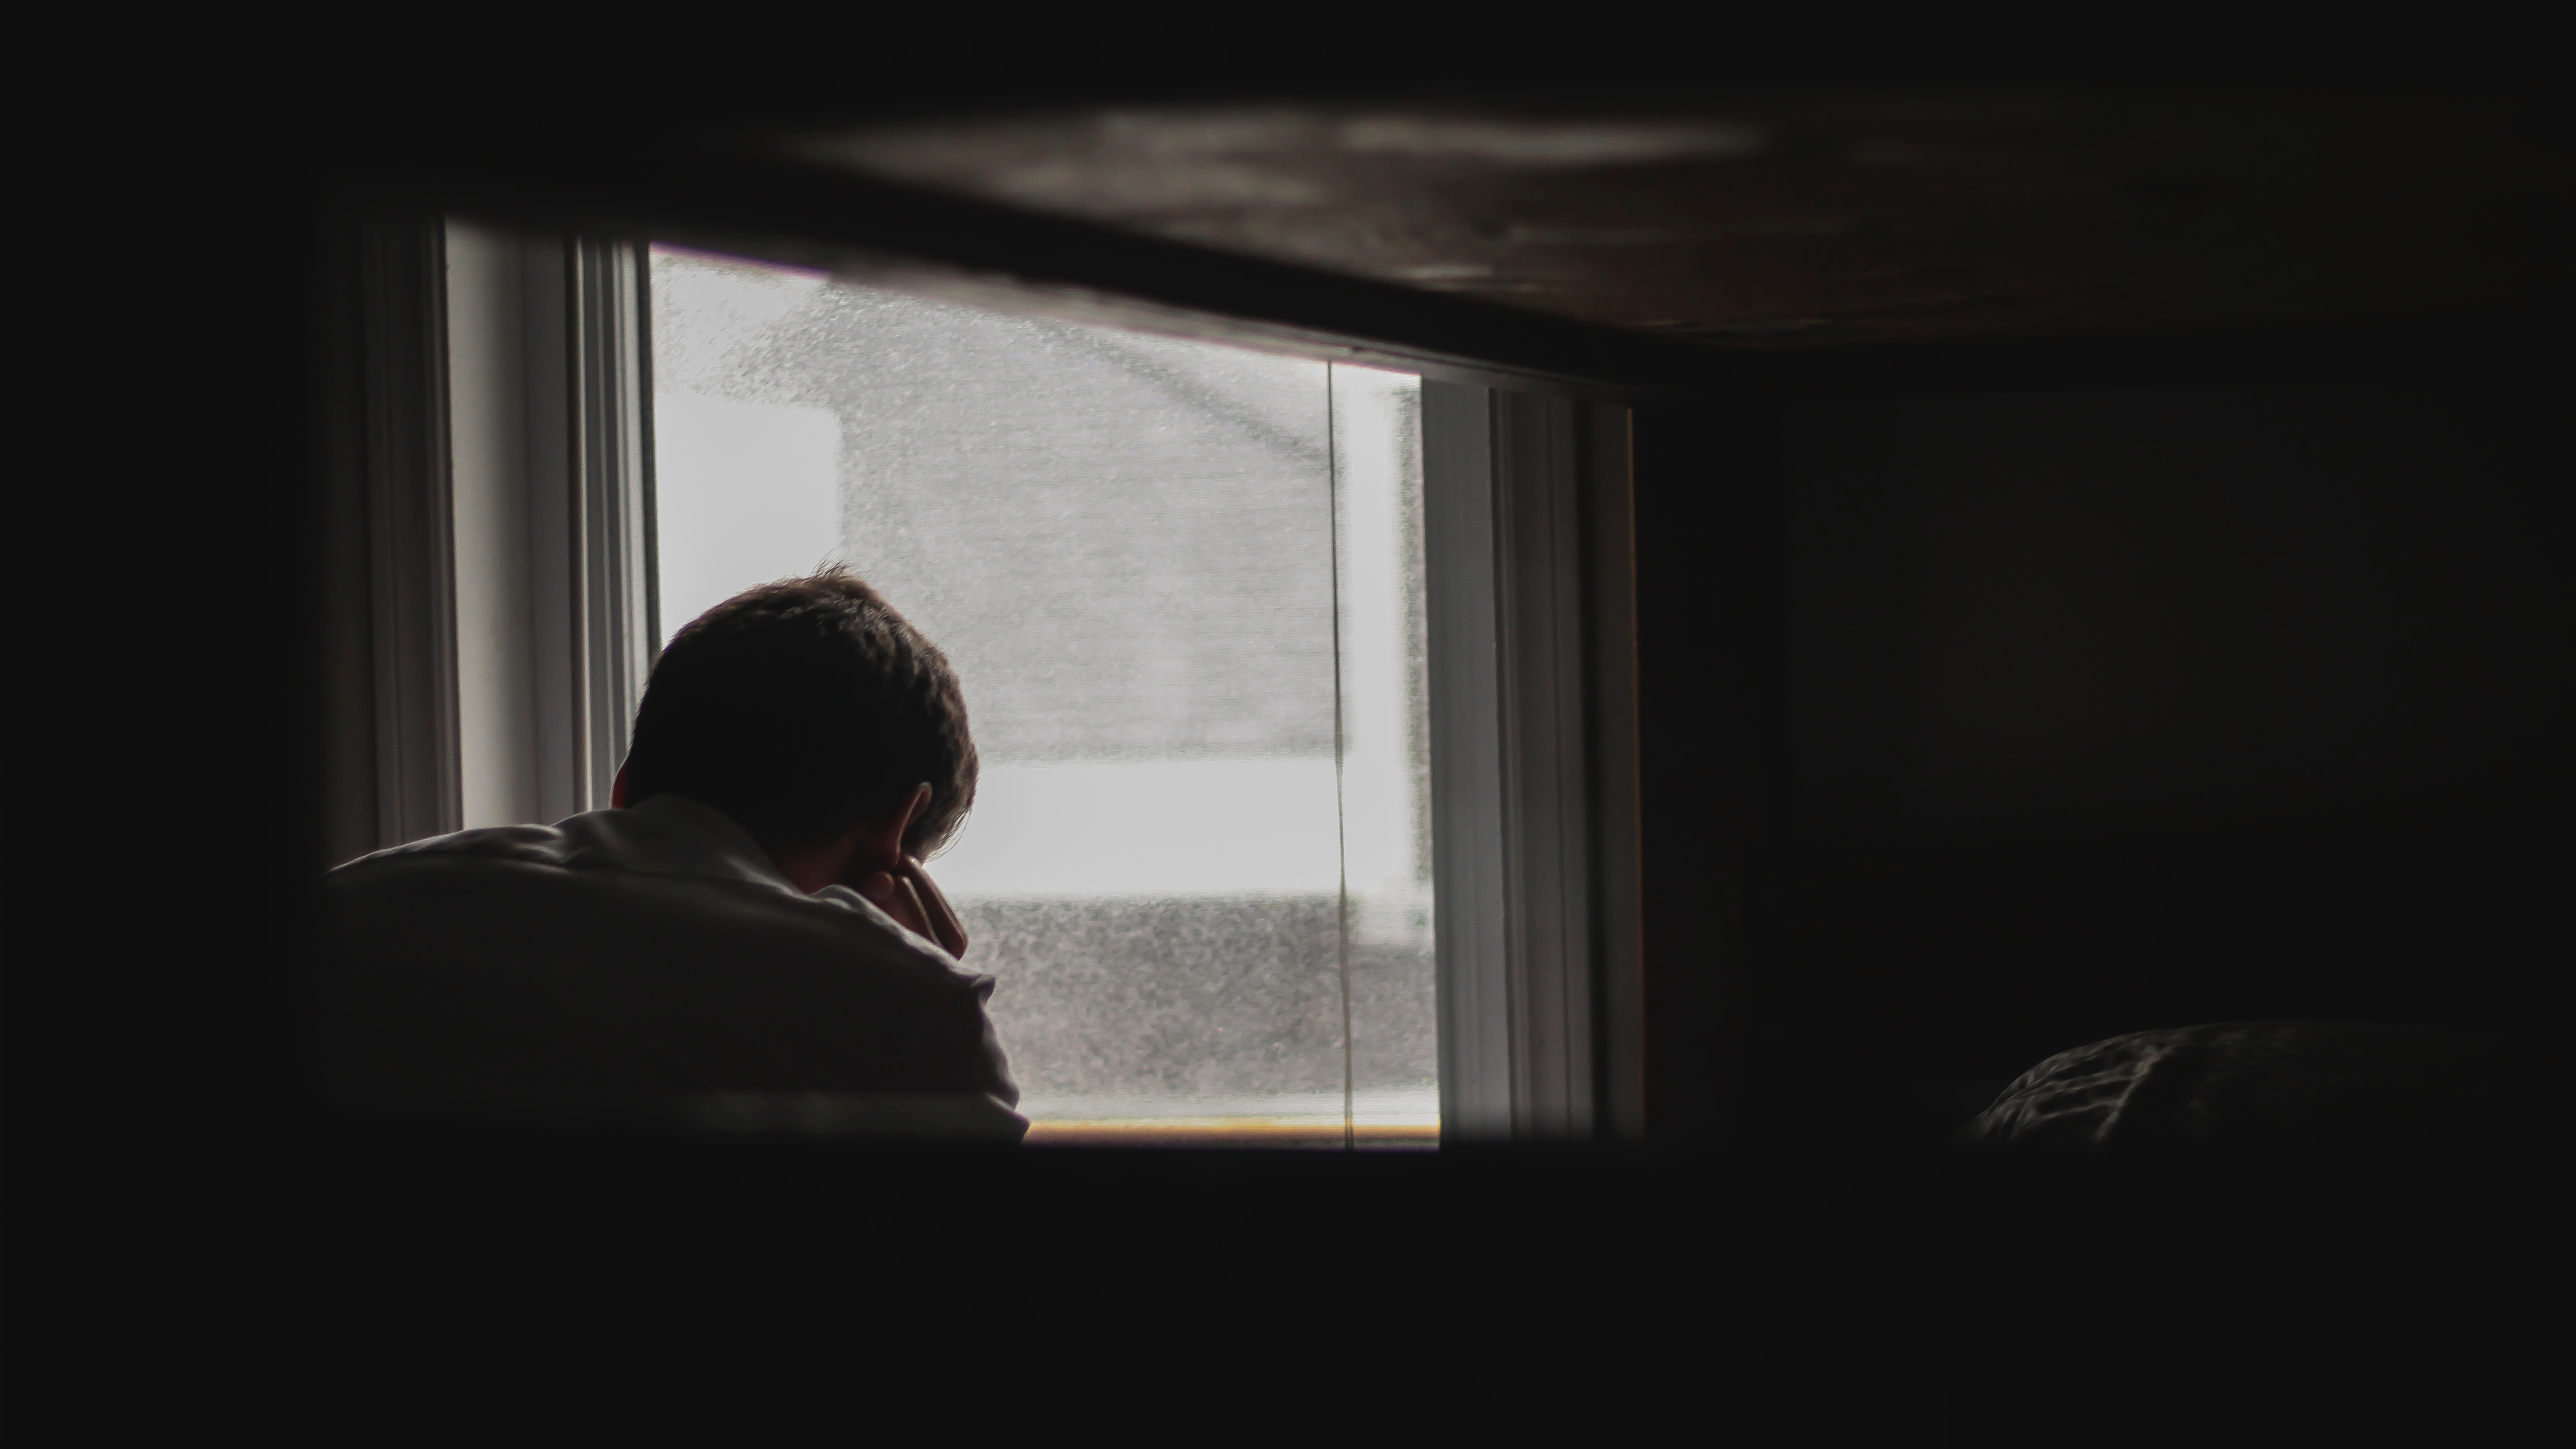 A person in a dark room seen through the gap in a shelving unit looks out of a window with a depressed mood